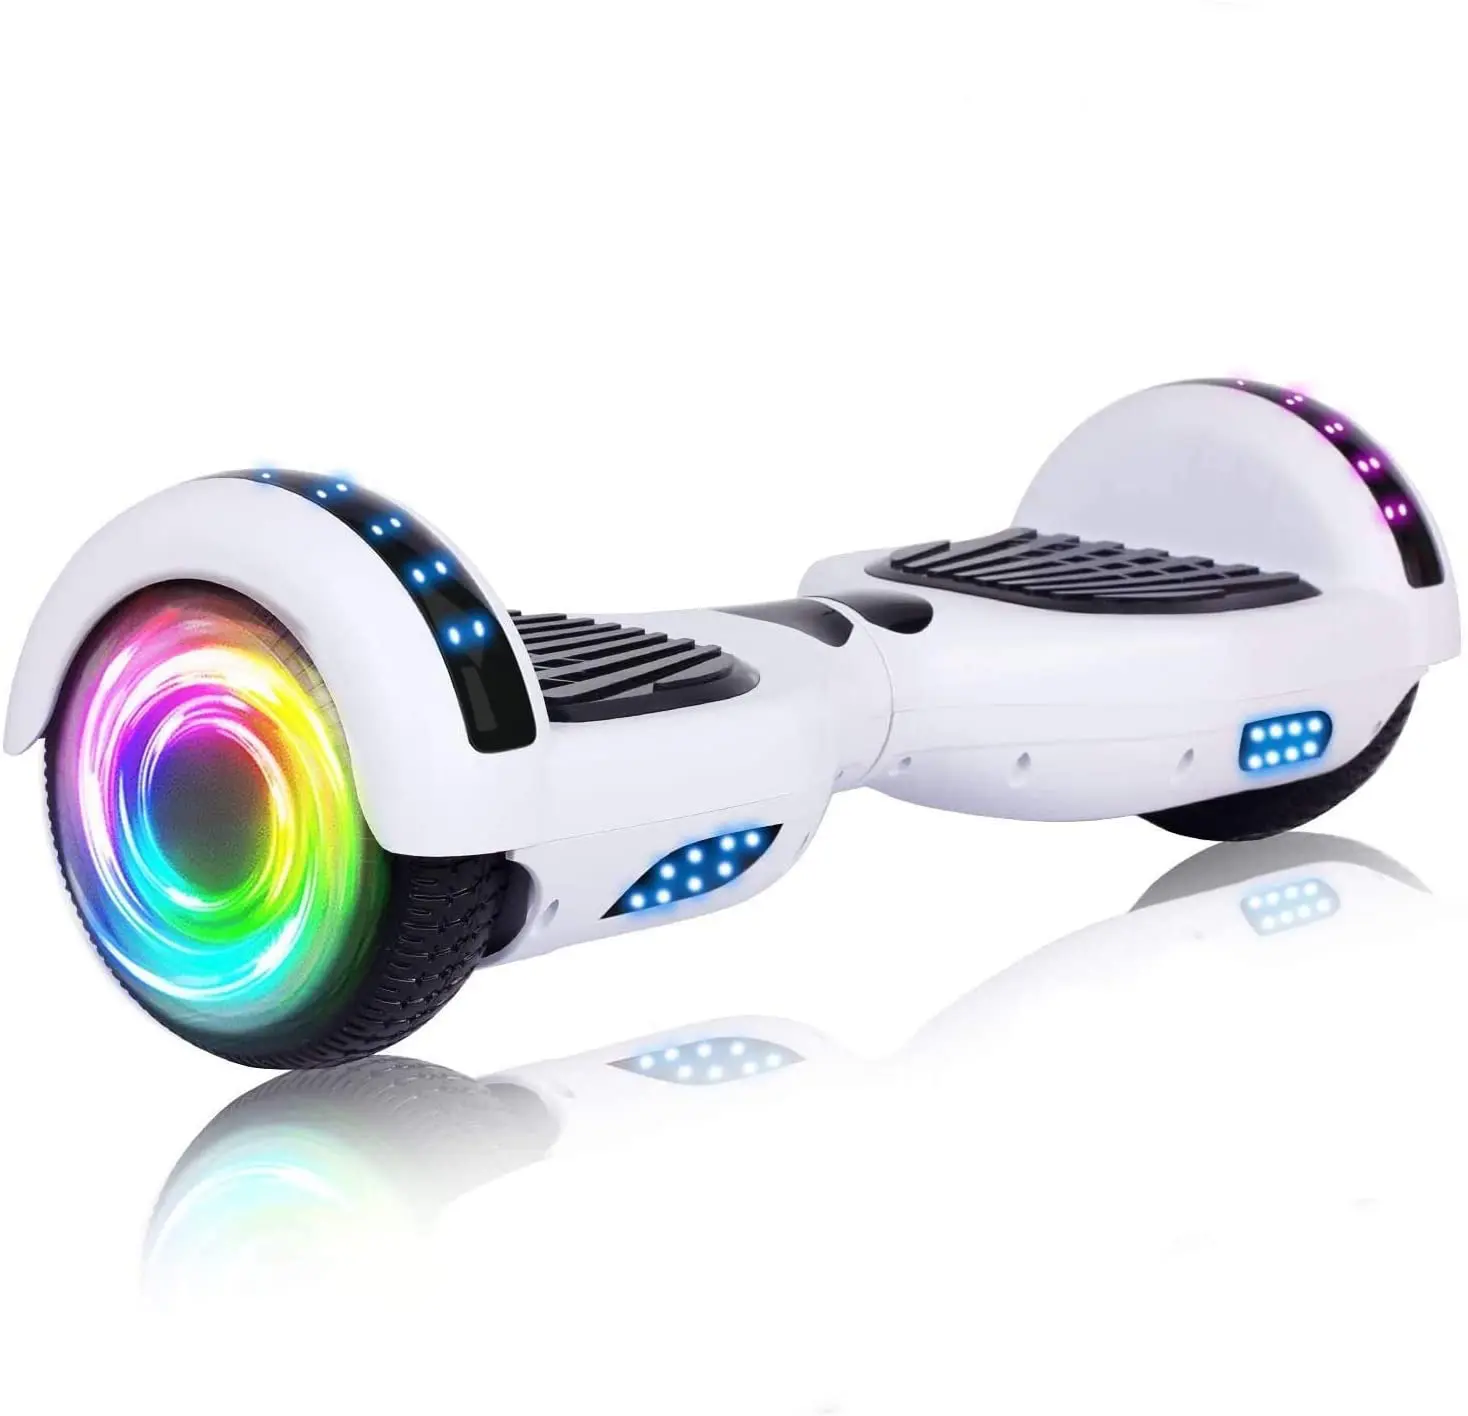 SISIGAD Hoverboard